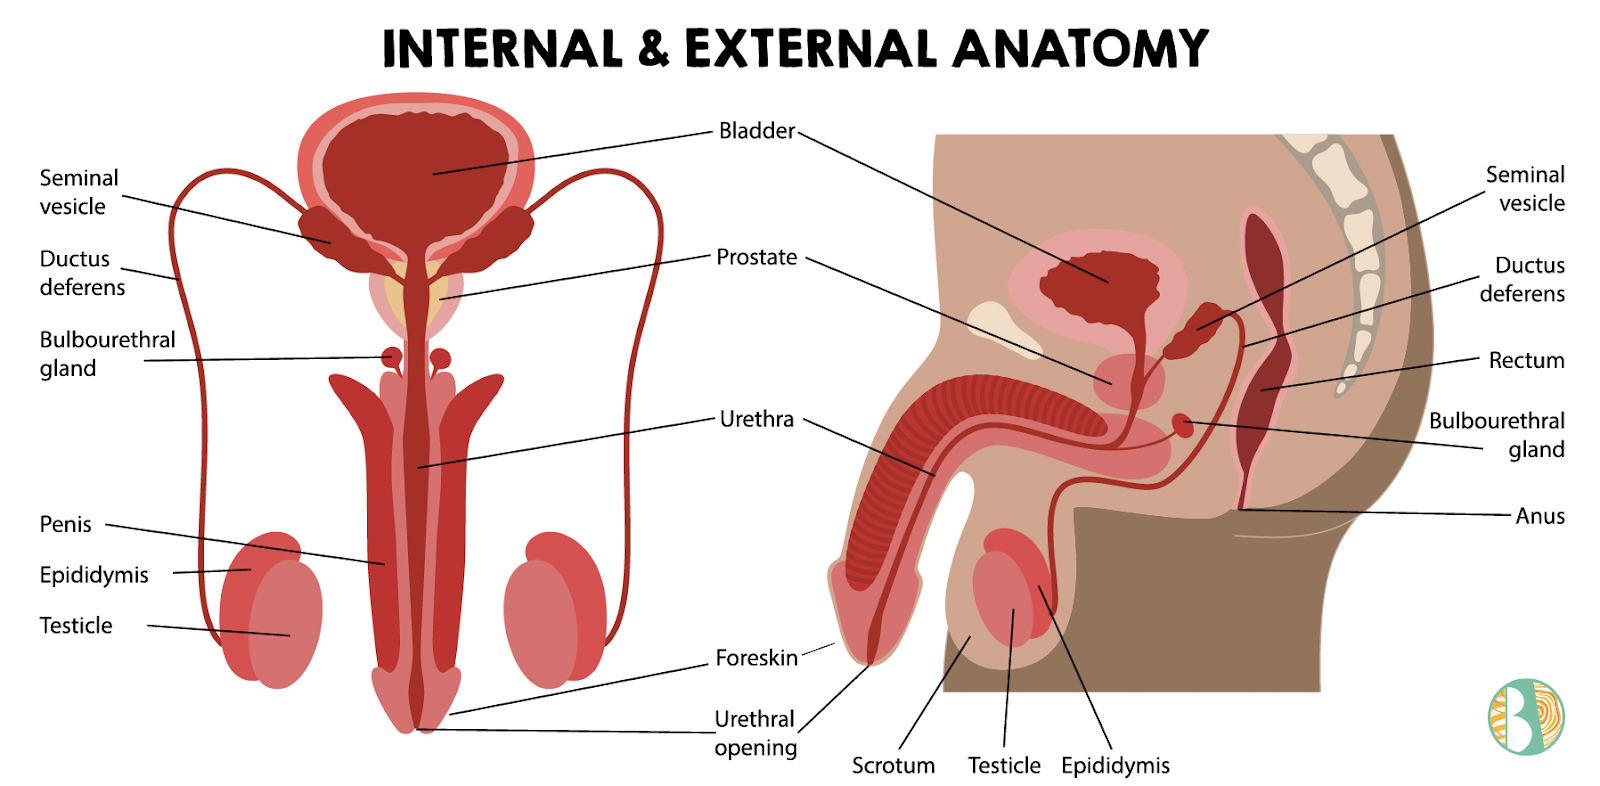 Internal and External Penis and Testes Anatomy Illustration.